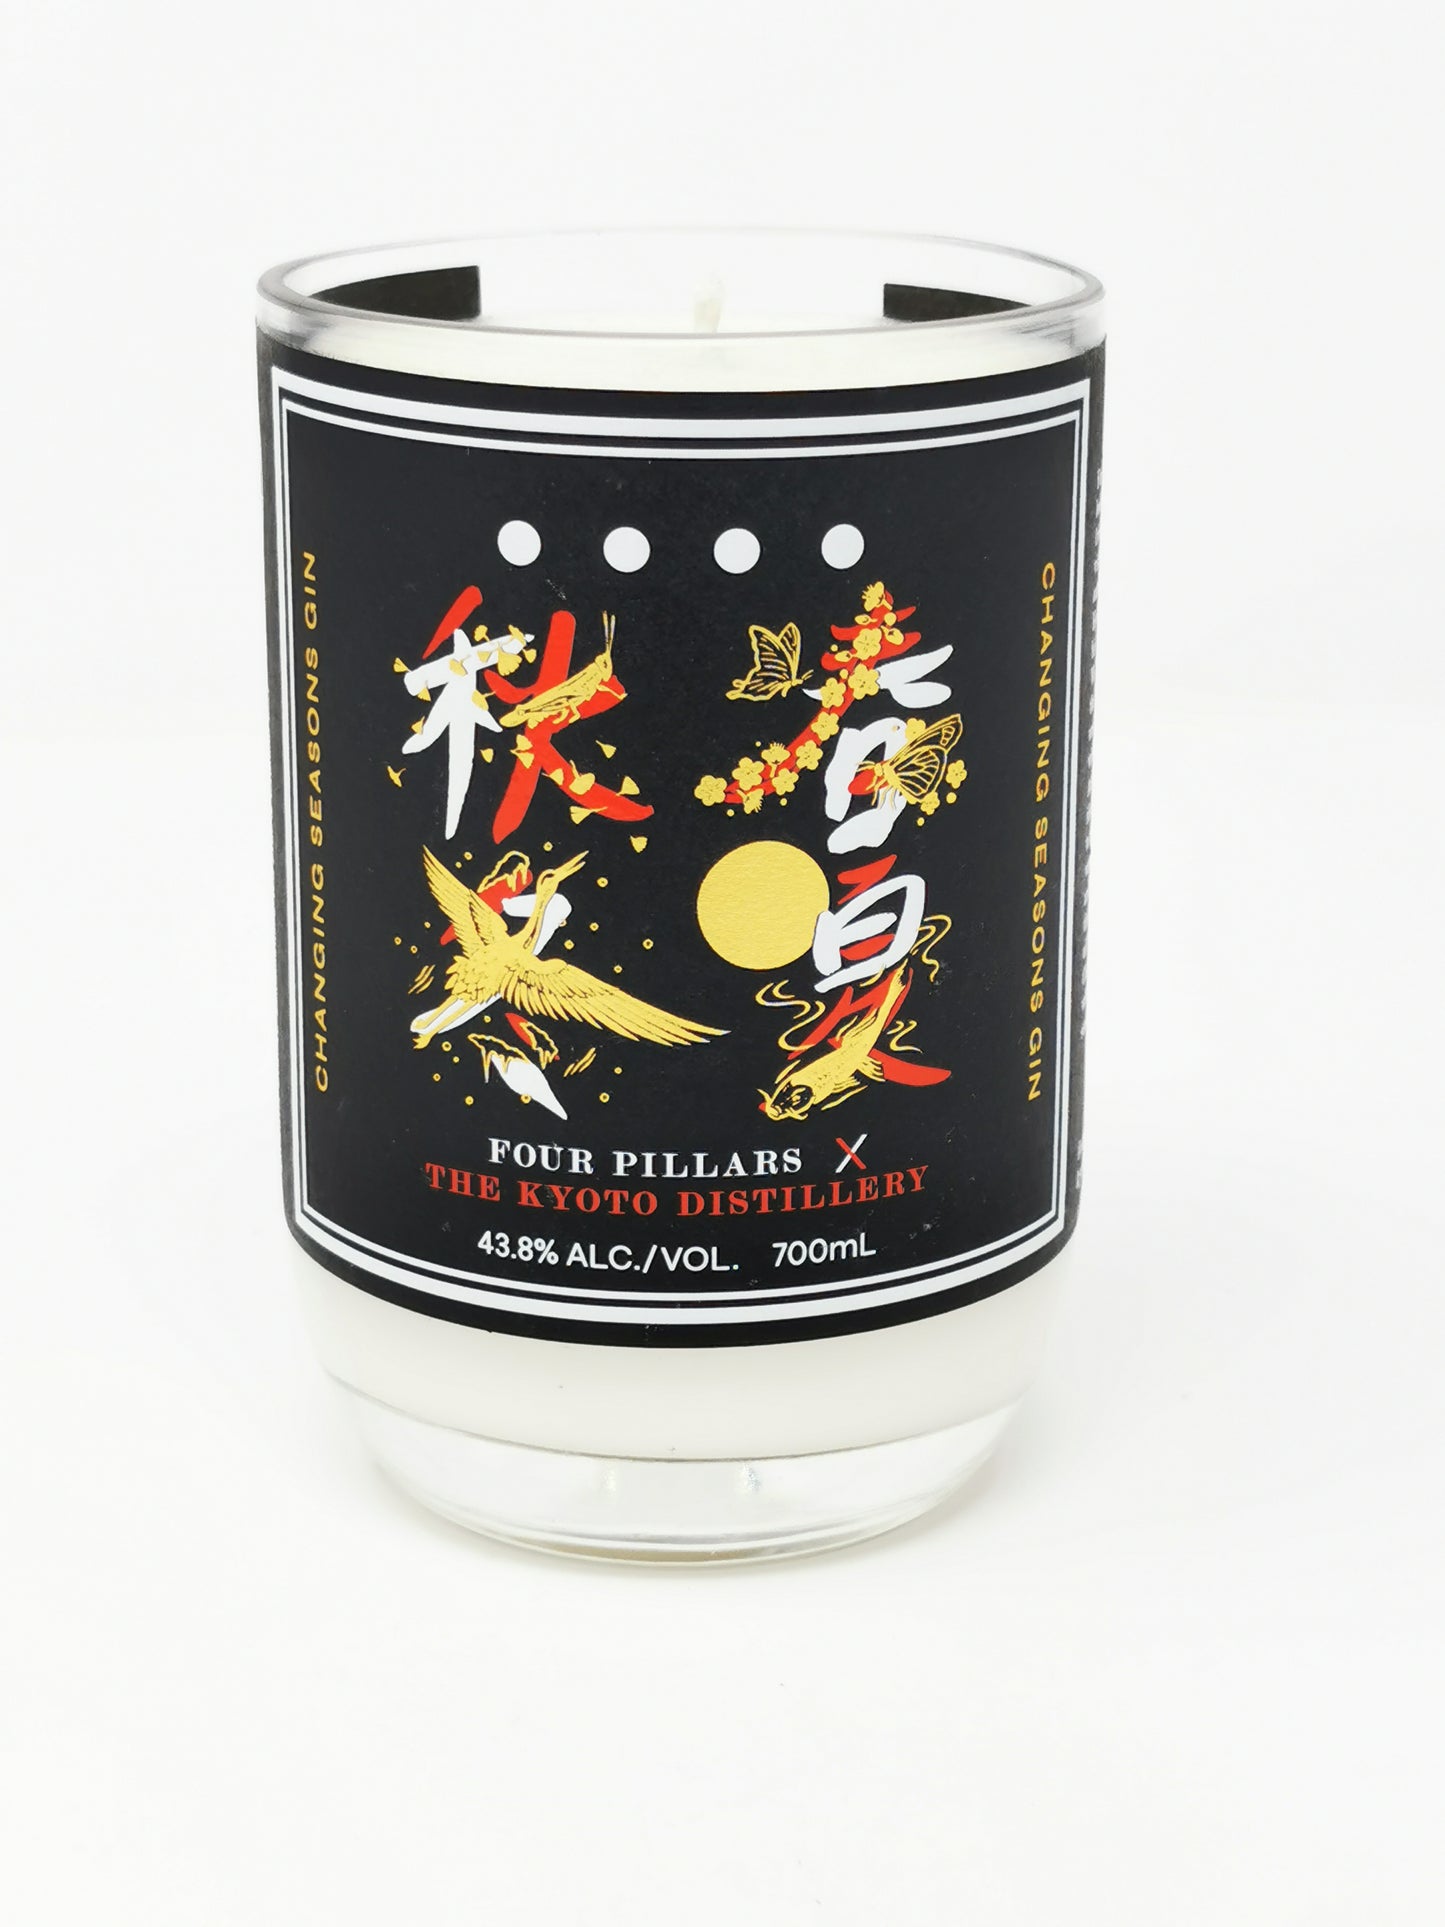 Eco Friendly-Four Pillars X The Kyoto Distillery Gin Bottle Candle-Gin Bottle Candles-Adhock Homeware